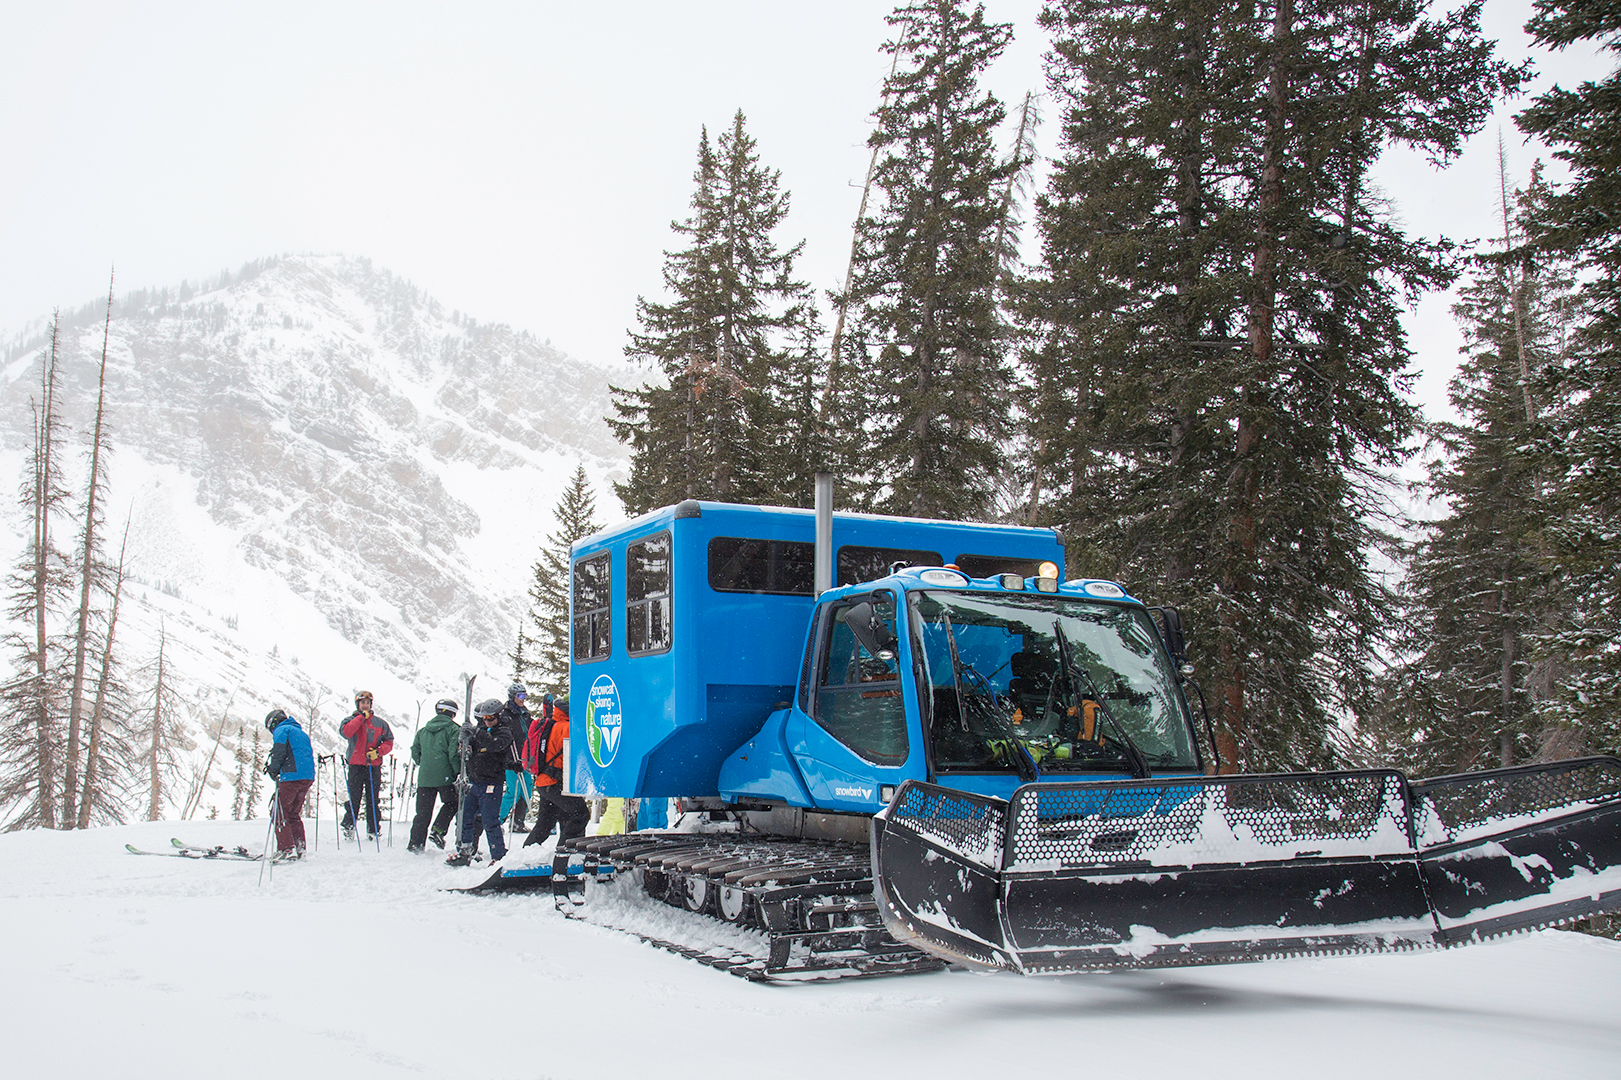 Group stands outside snowcat while snowcat skiing